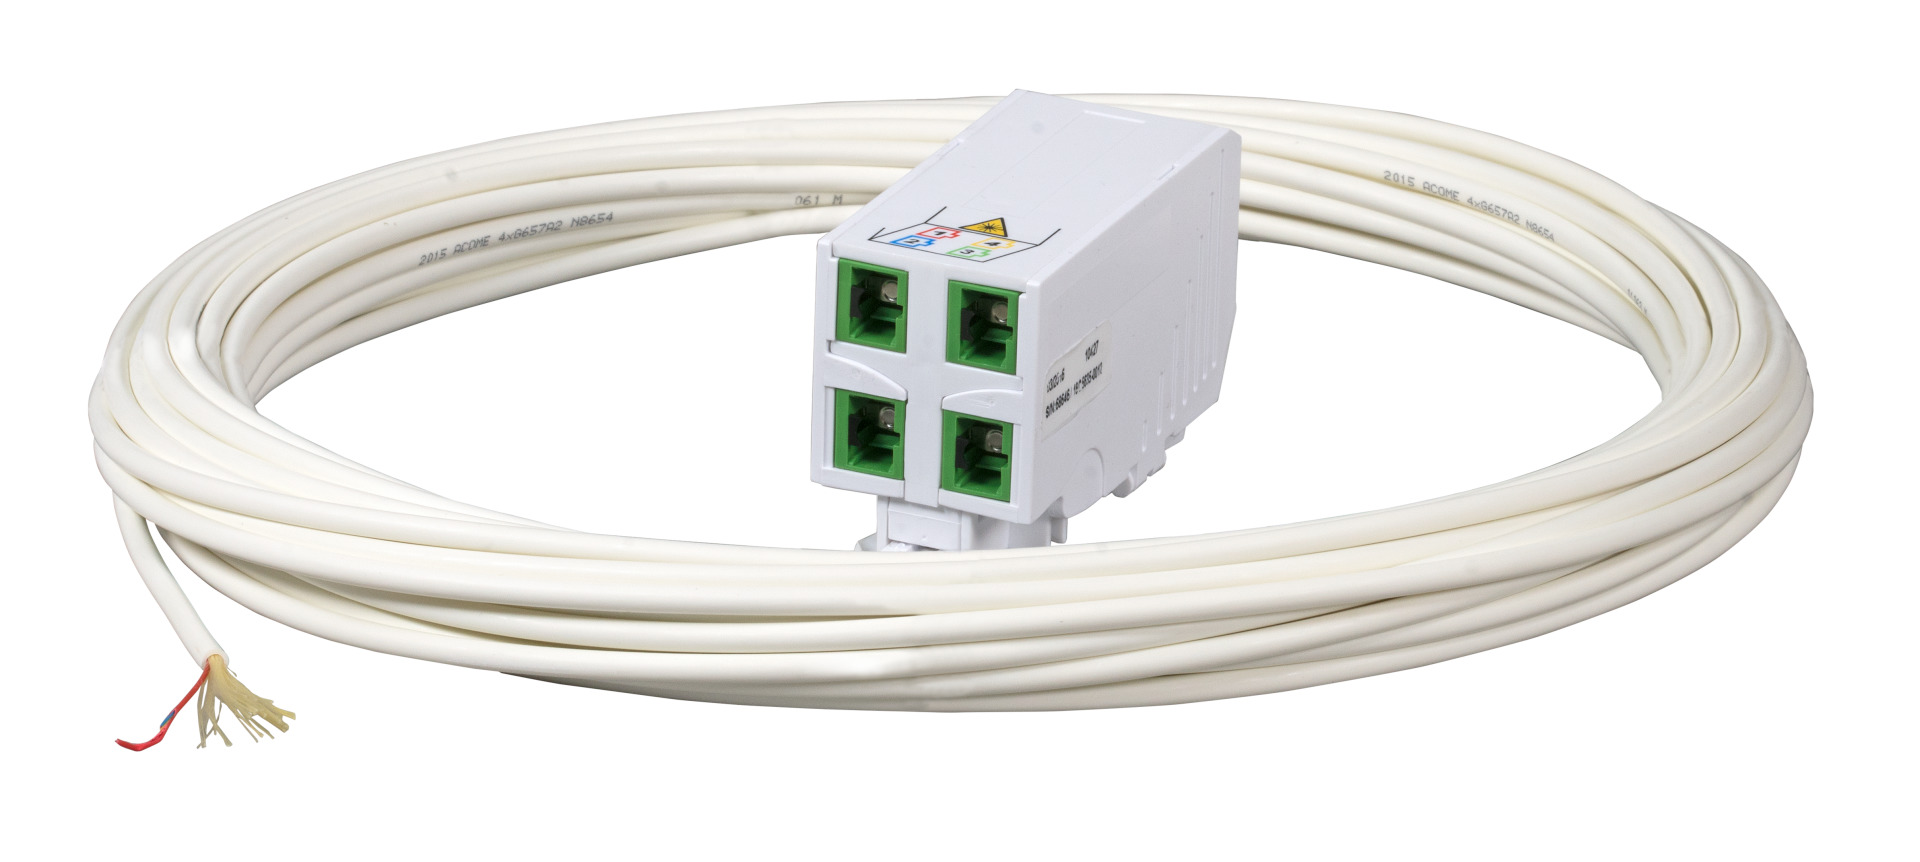 FTTH DIN RAIL Adapter,1x SC/APC adapter, Laserprotection integrated,30m DropCa